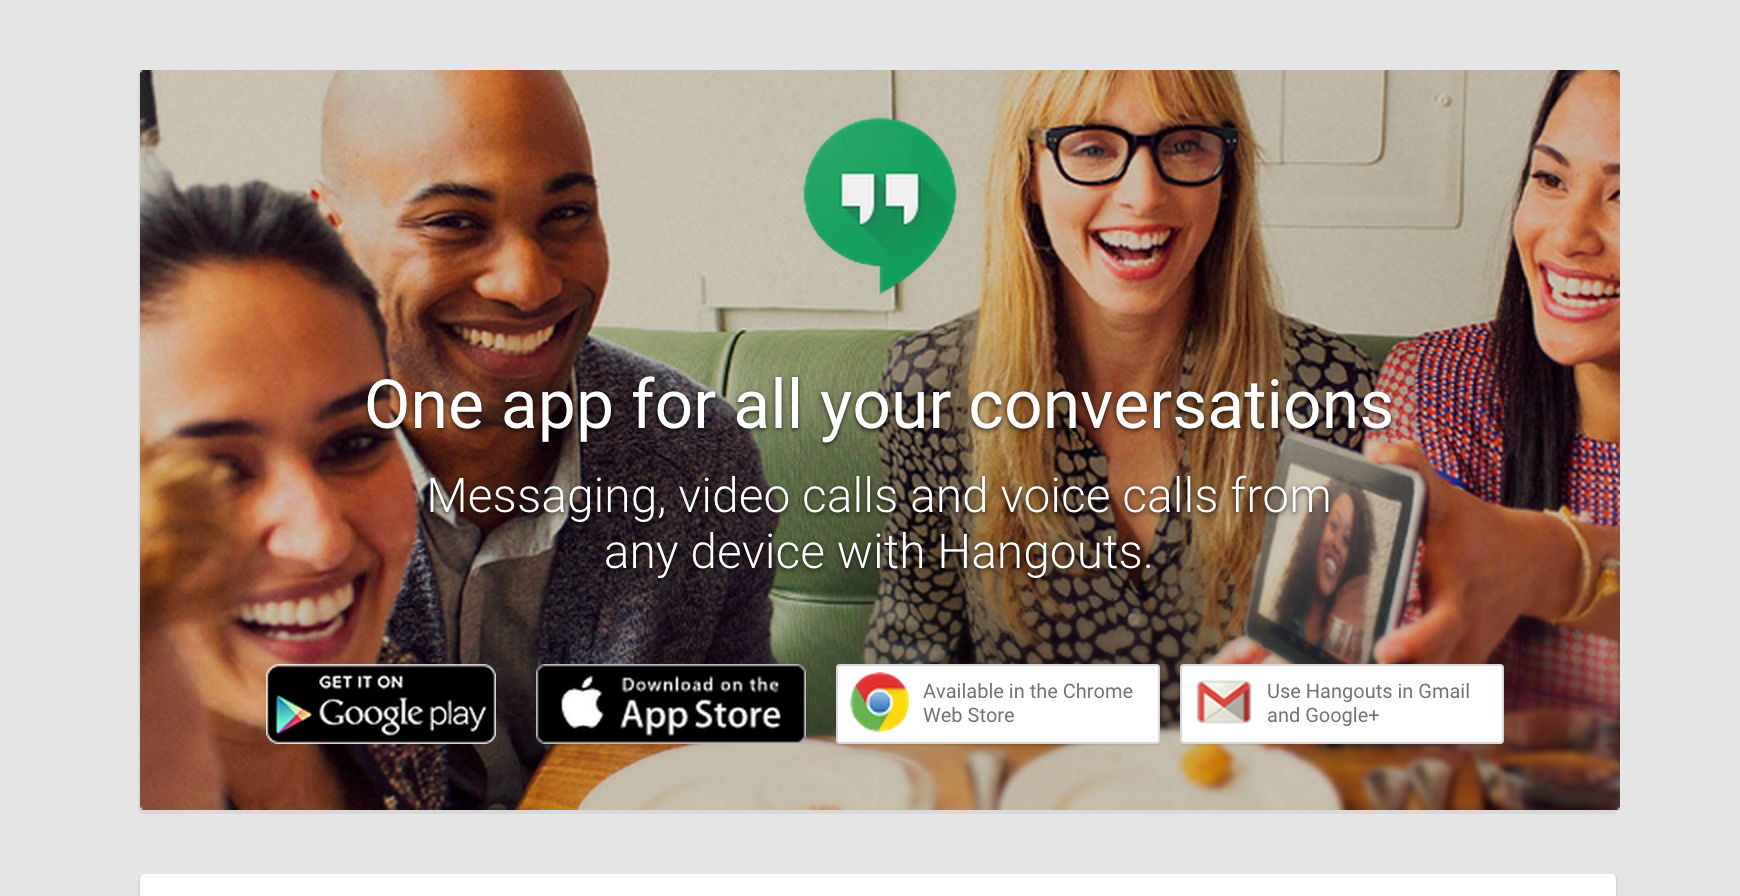 Google Hangouts - one app for all you conversations